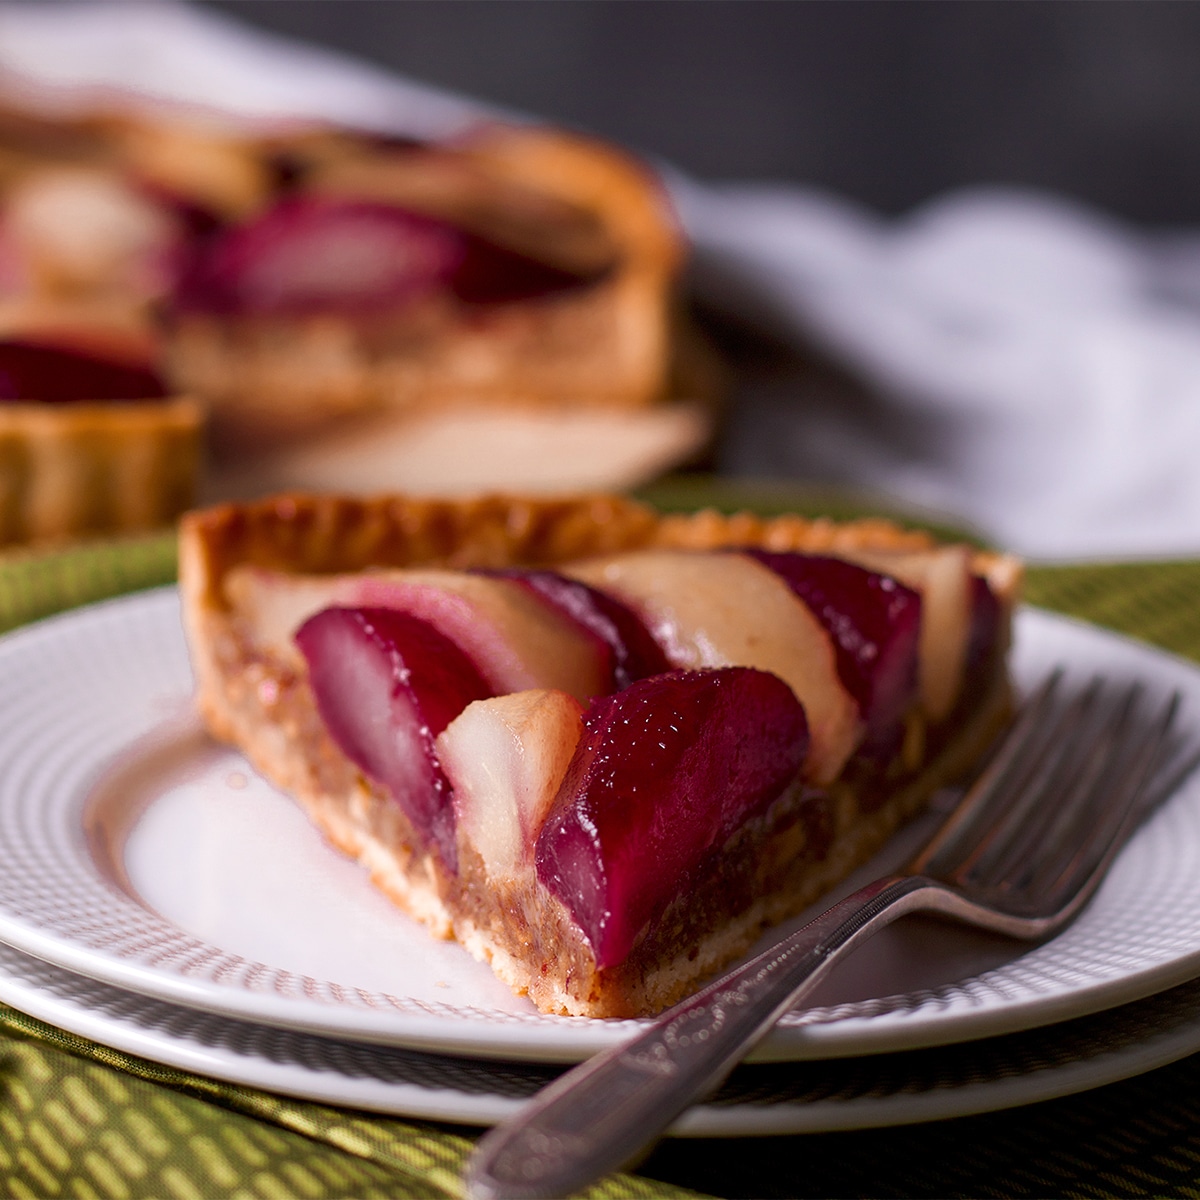 A slice of poached pear and frangipane tart on a white plate with a fork.